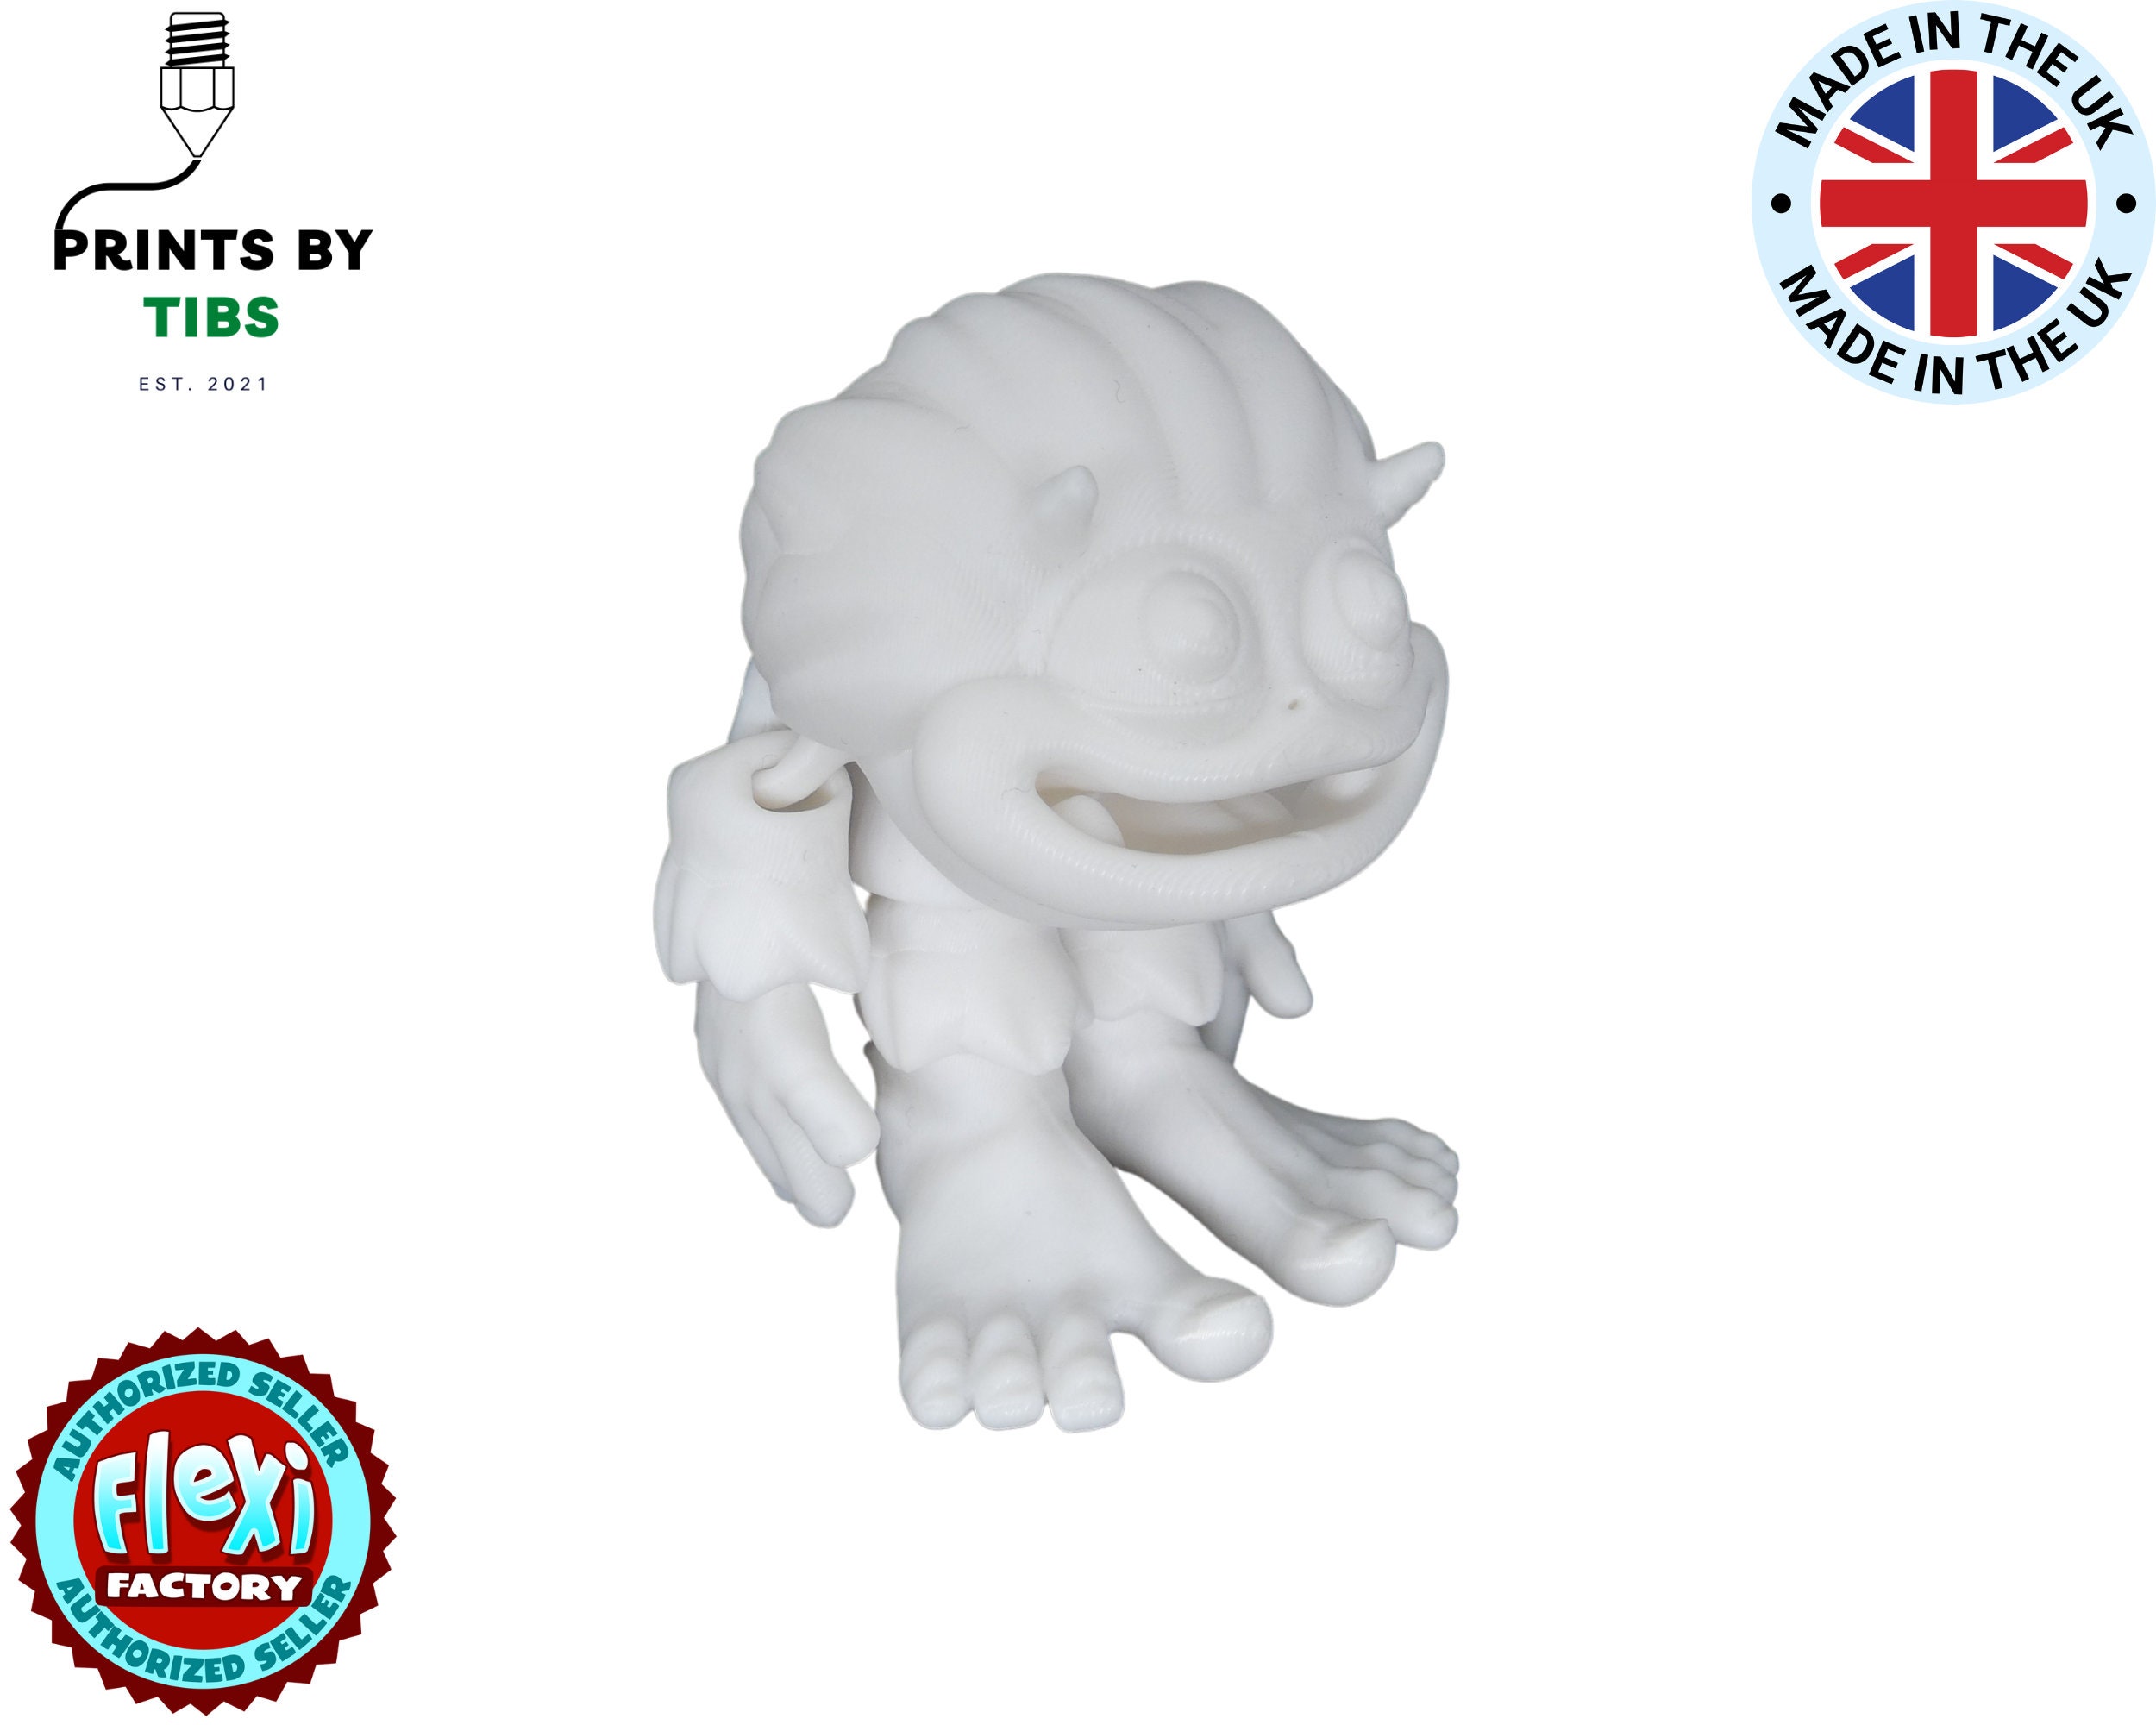 3D Printed Articulating Flexible Yeti Sensory Toy Gadget Flexi Factory  Authorized Seller Tiktok Articulated Abominable Snowman 